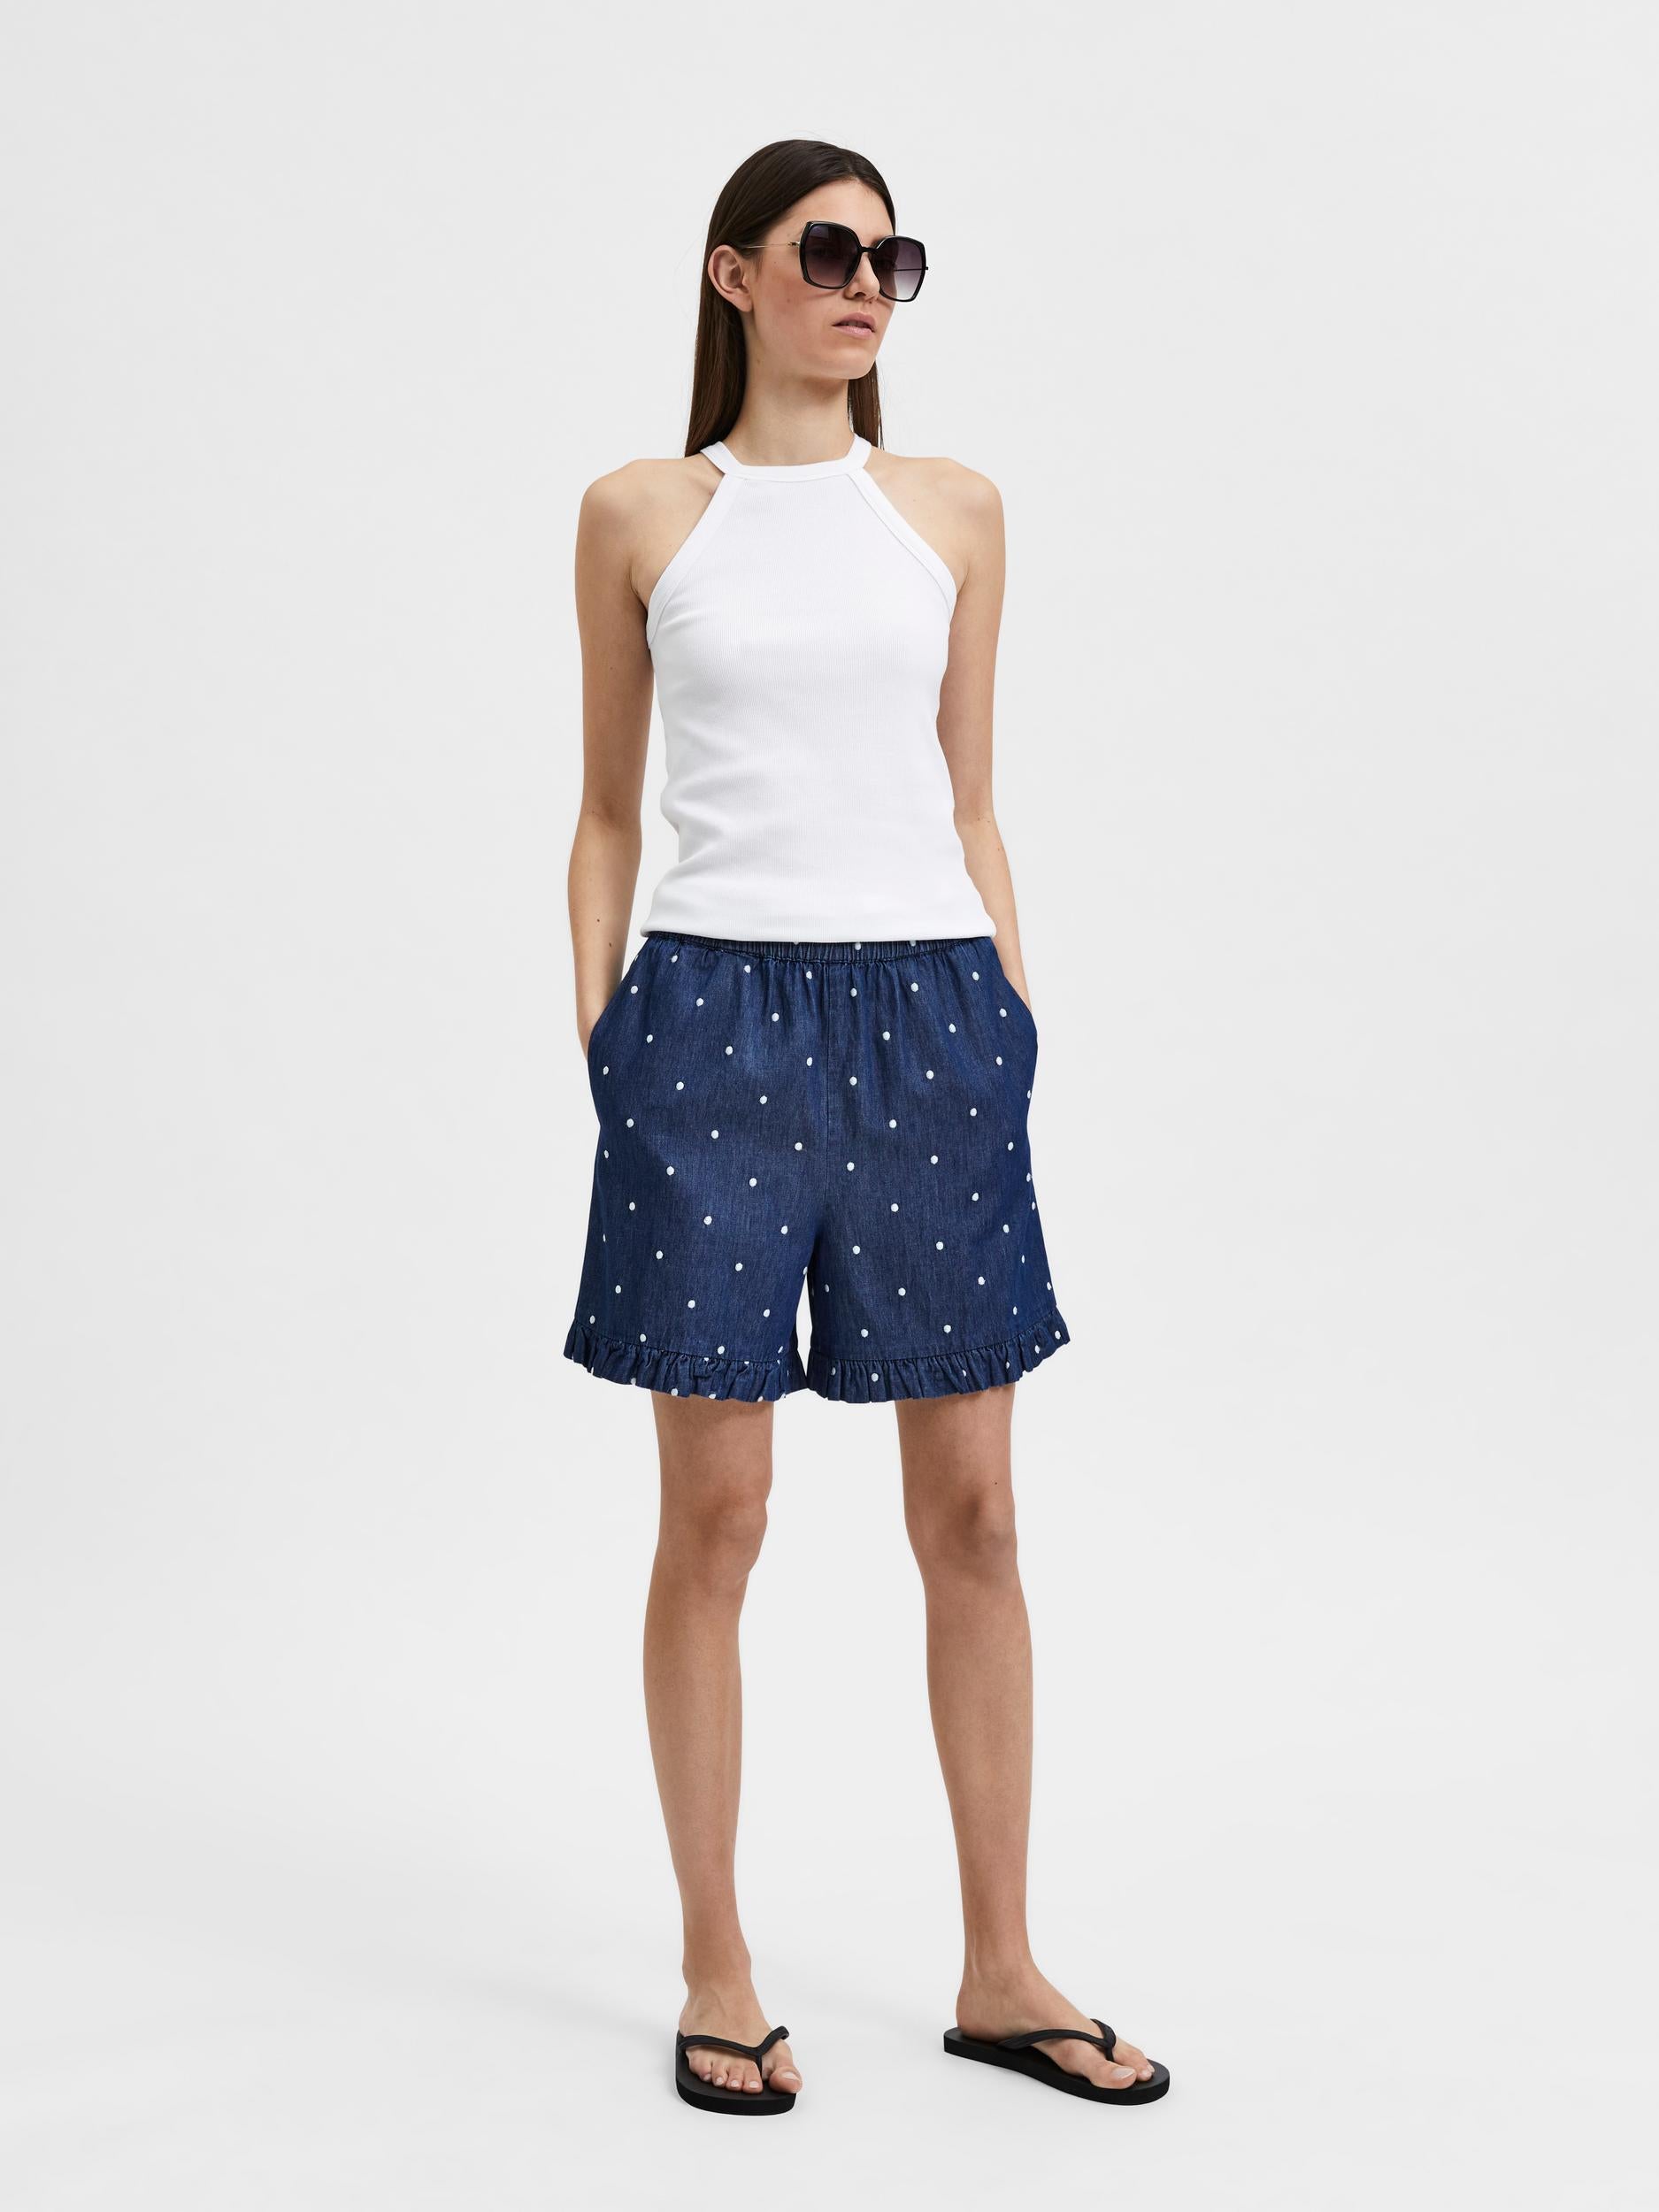 Selected Femme "Analipa" Top weiss